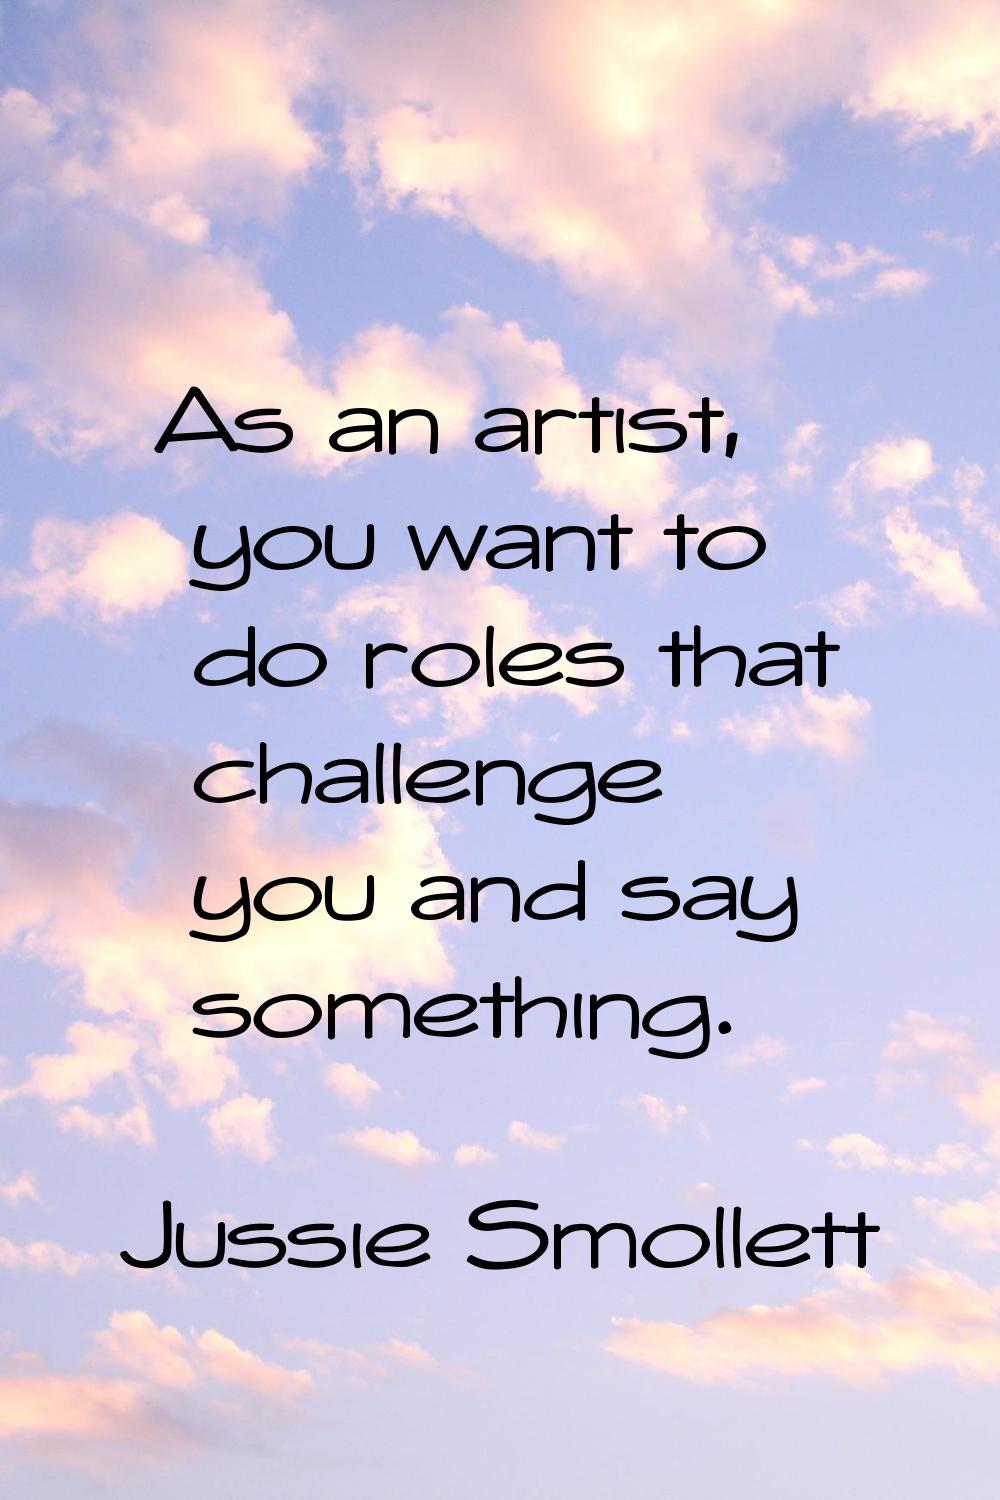 As an artist, you want to do roles that challenge you and say something.